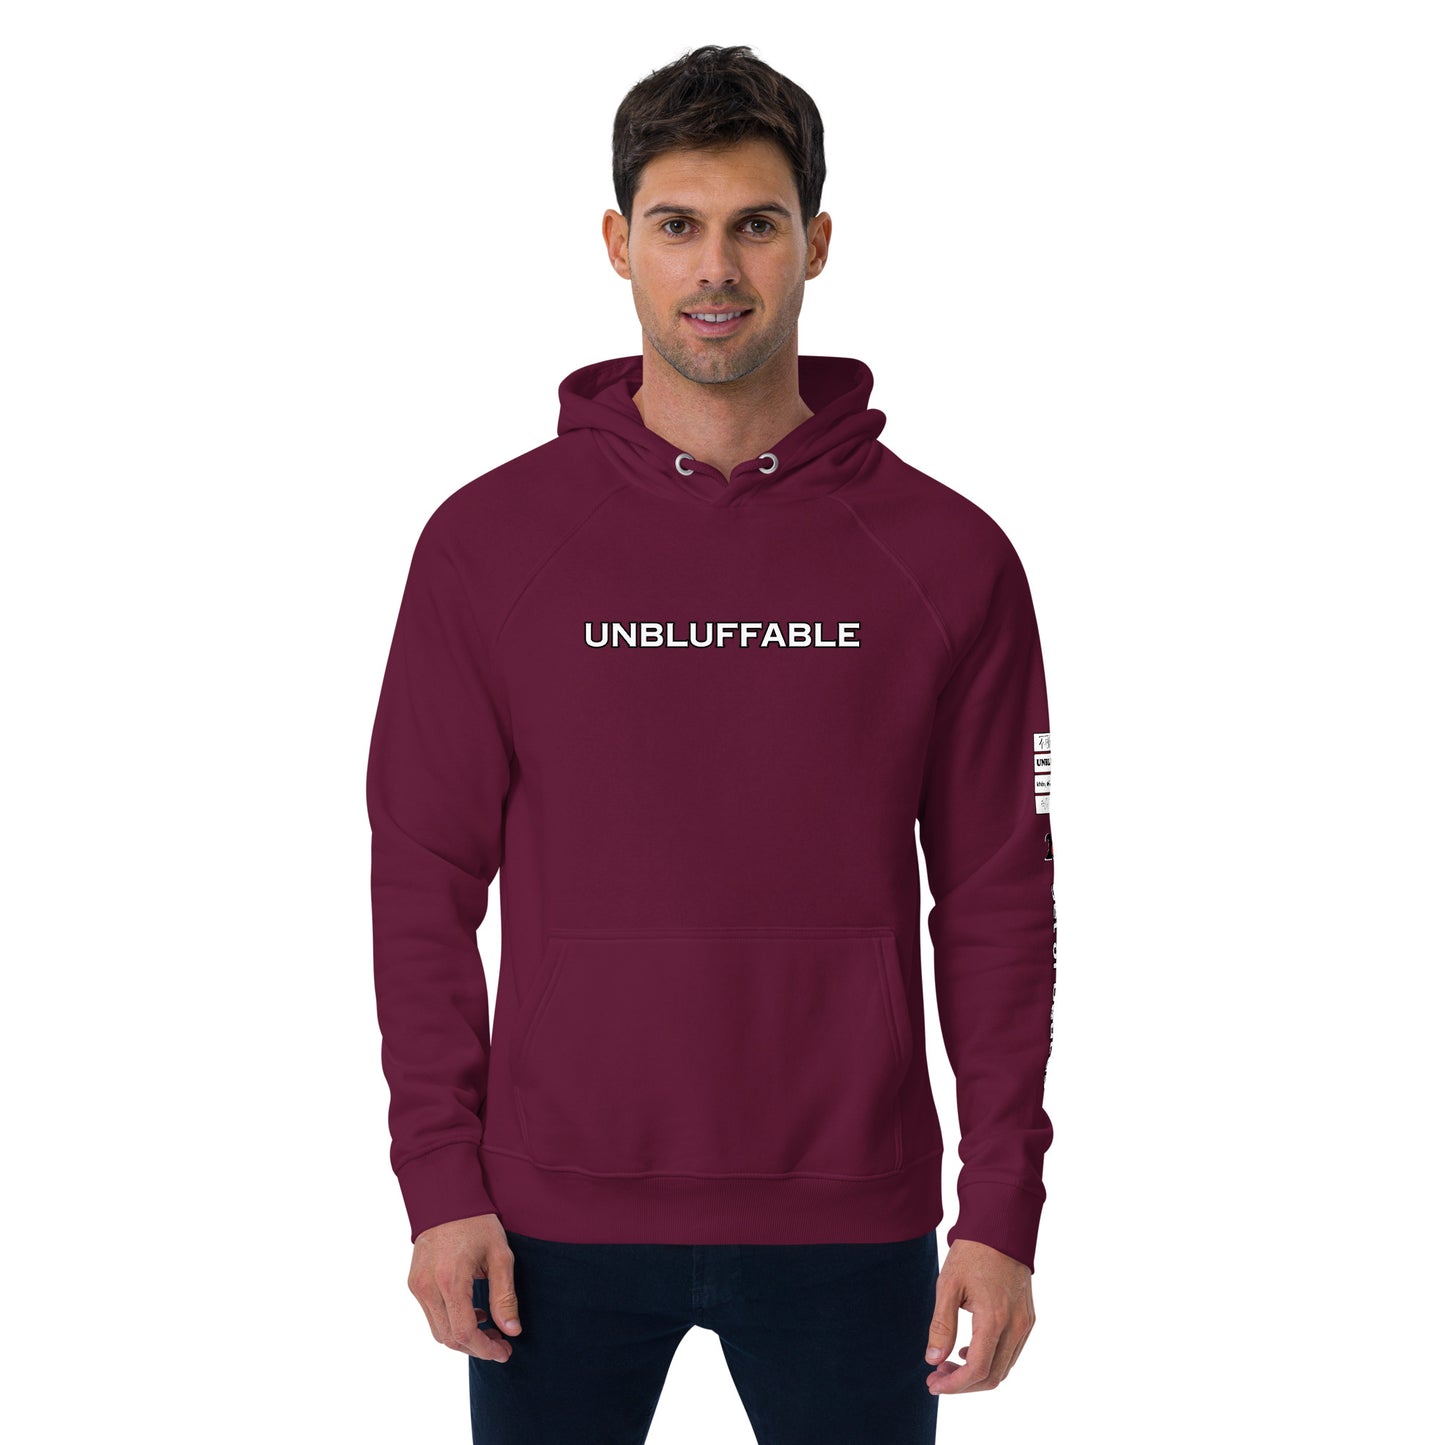 Club promo UNBLUFFABLE Set of Deuces Hoodie